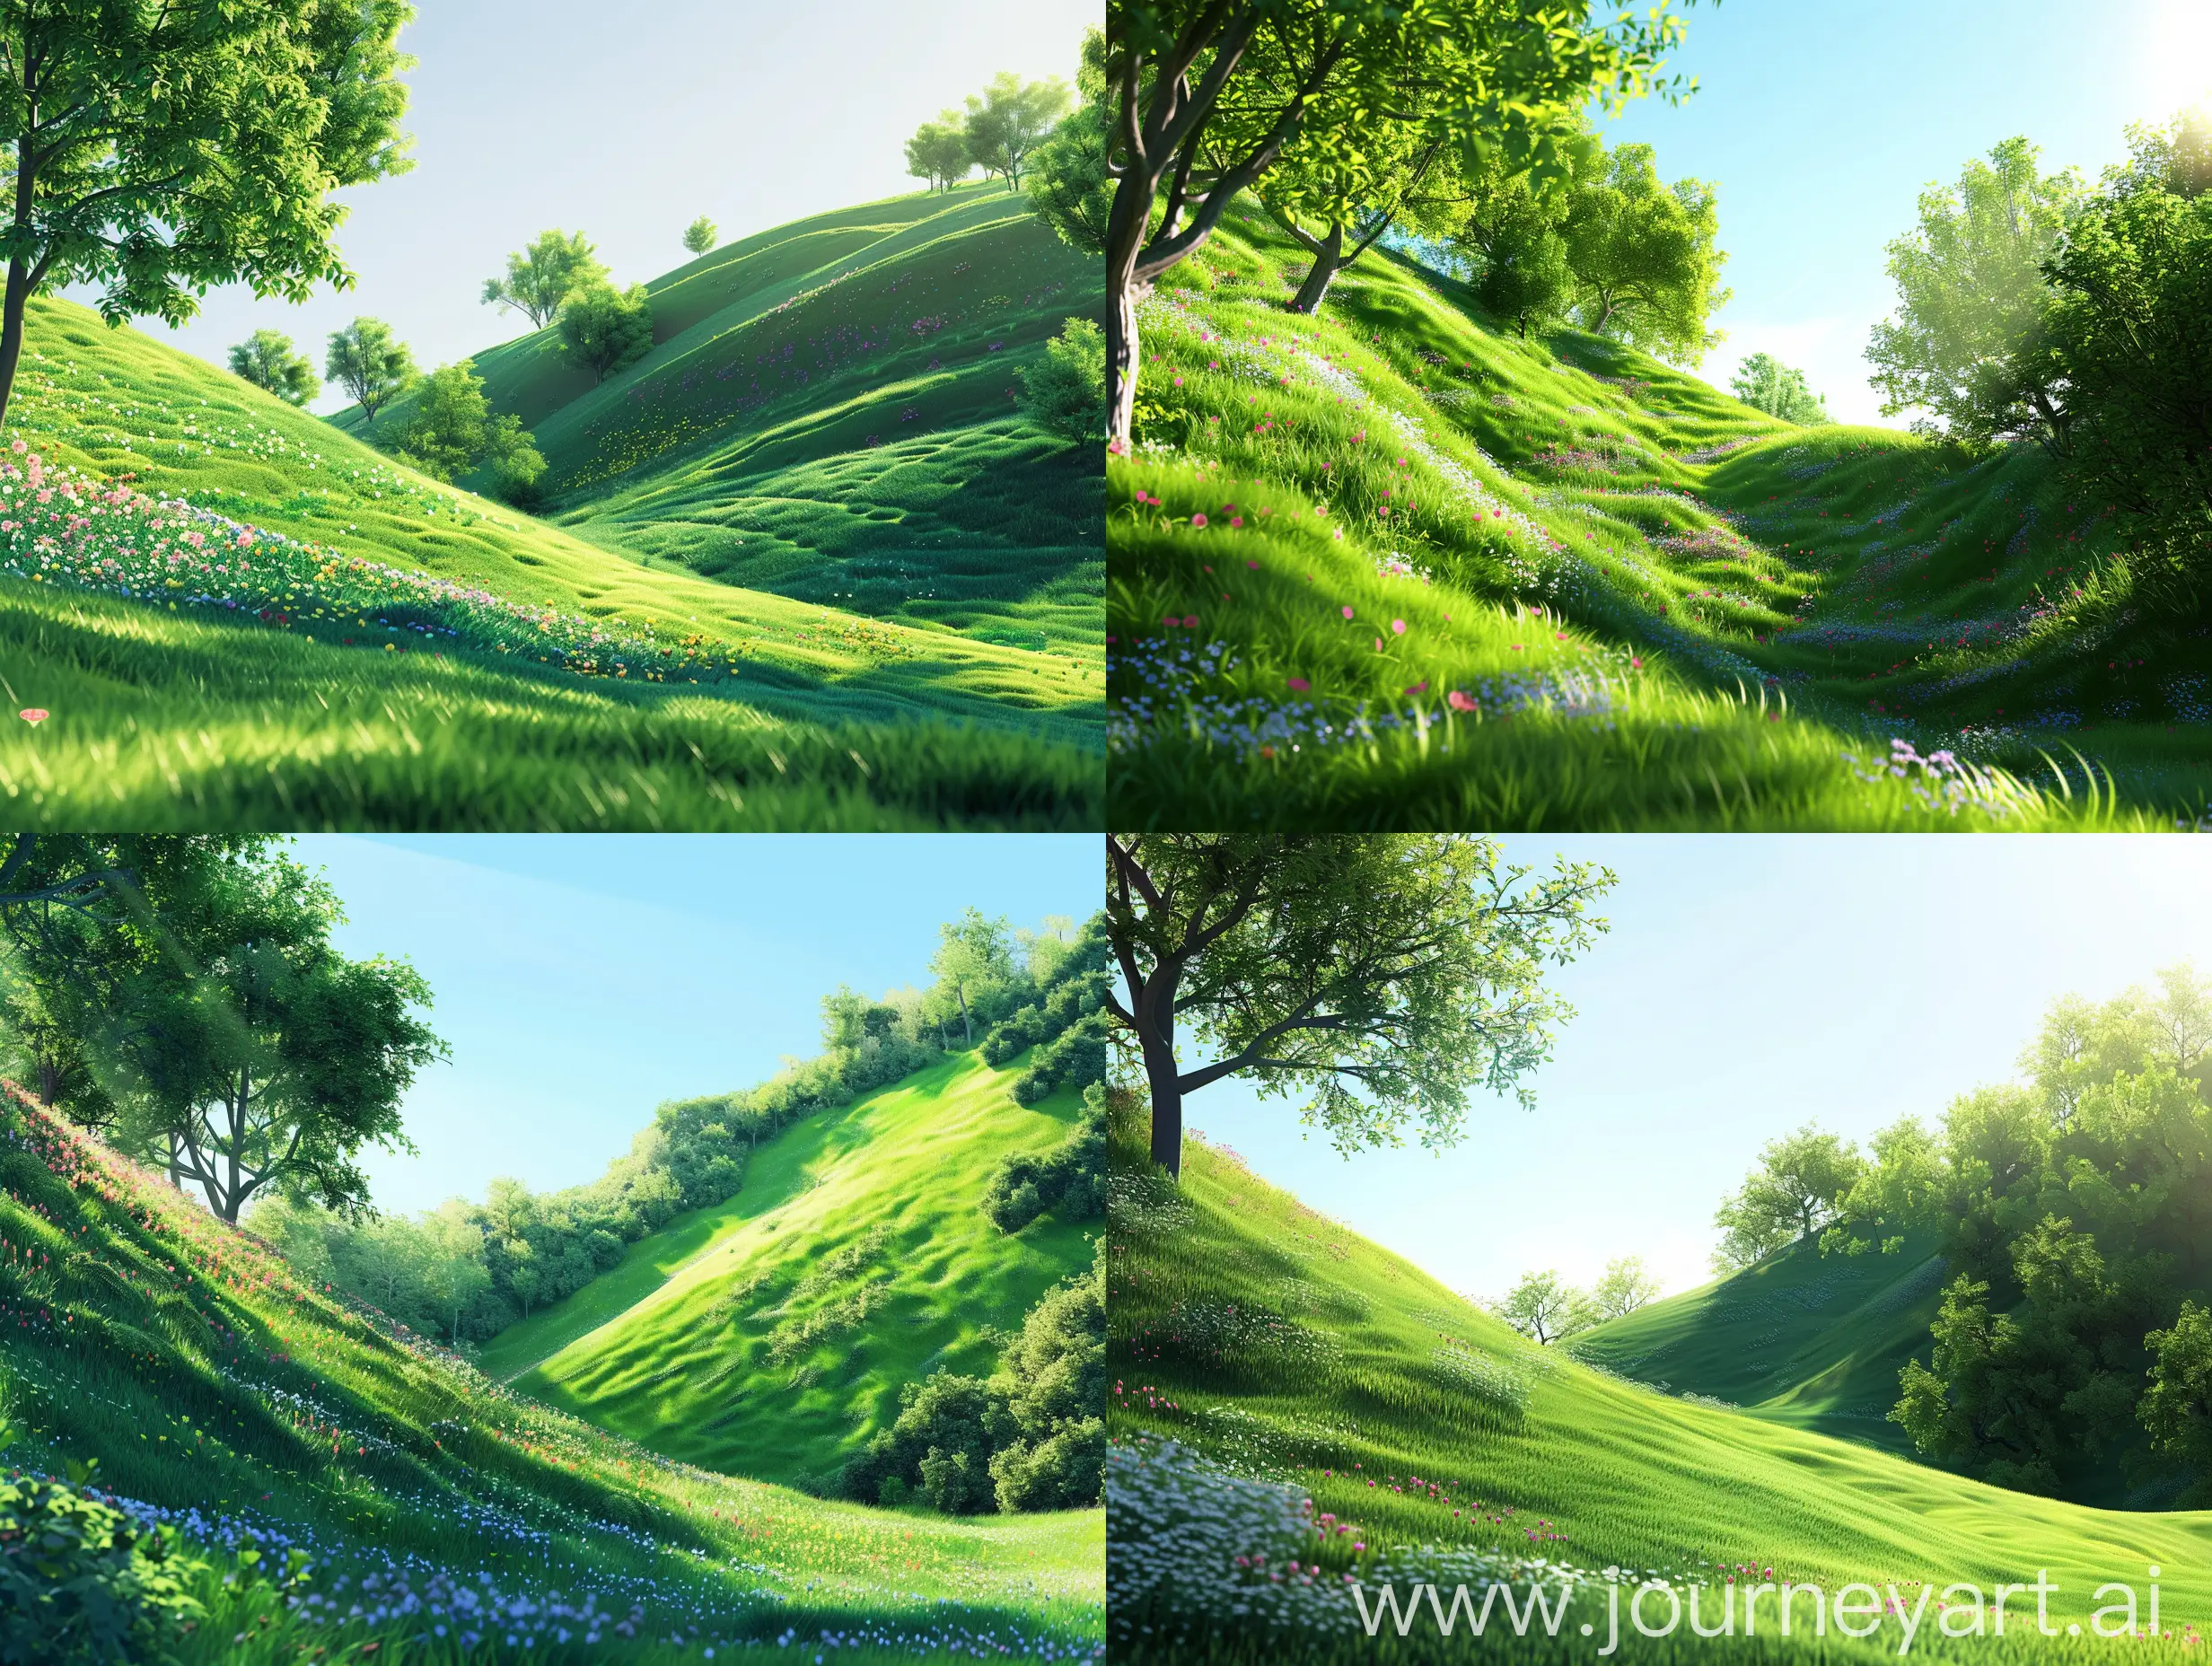 16:9, 3D cute style. The image depicts a serene summer landscape. In the foreground, a lush green hill dominates the left side of the frame, its slopes covered in verdant grass and dotted with colorful wildflowers. The hillside gently rolls down, creating a sense of depth and tranquility. The sunlight filters through the trees on the hill, casting dappled shadows on the ground below. In the distance, a clear blue sky stretches out, hinting at the promise of a warm, sunny day. A feeling of peace and relaxation permeates the scene, inviting viewers to immerse themselves in the beauty of nature.